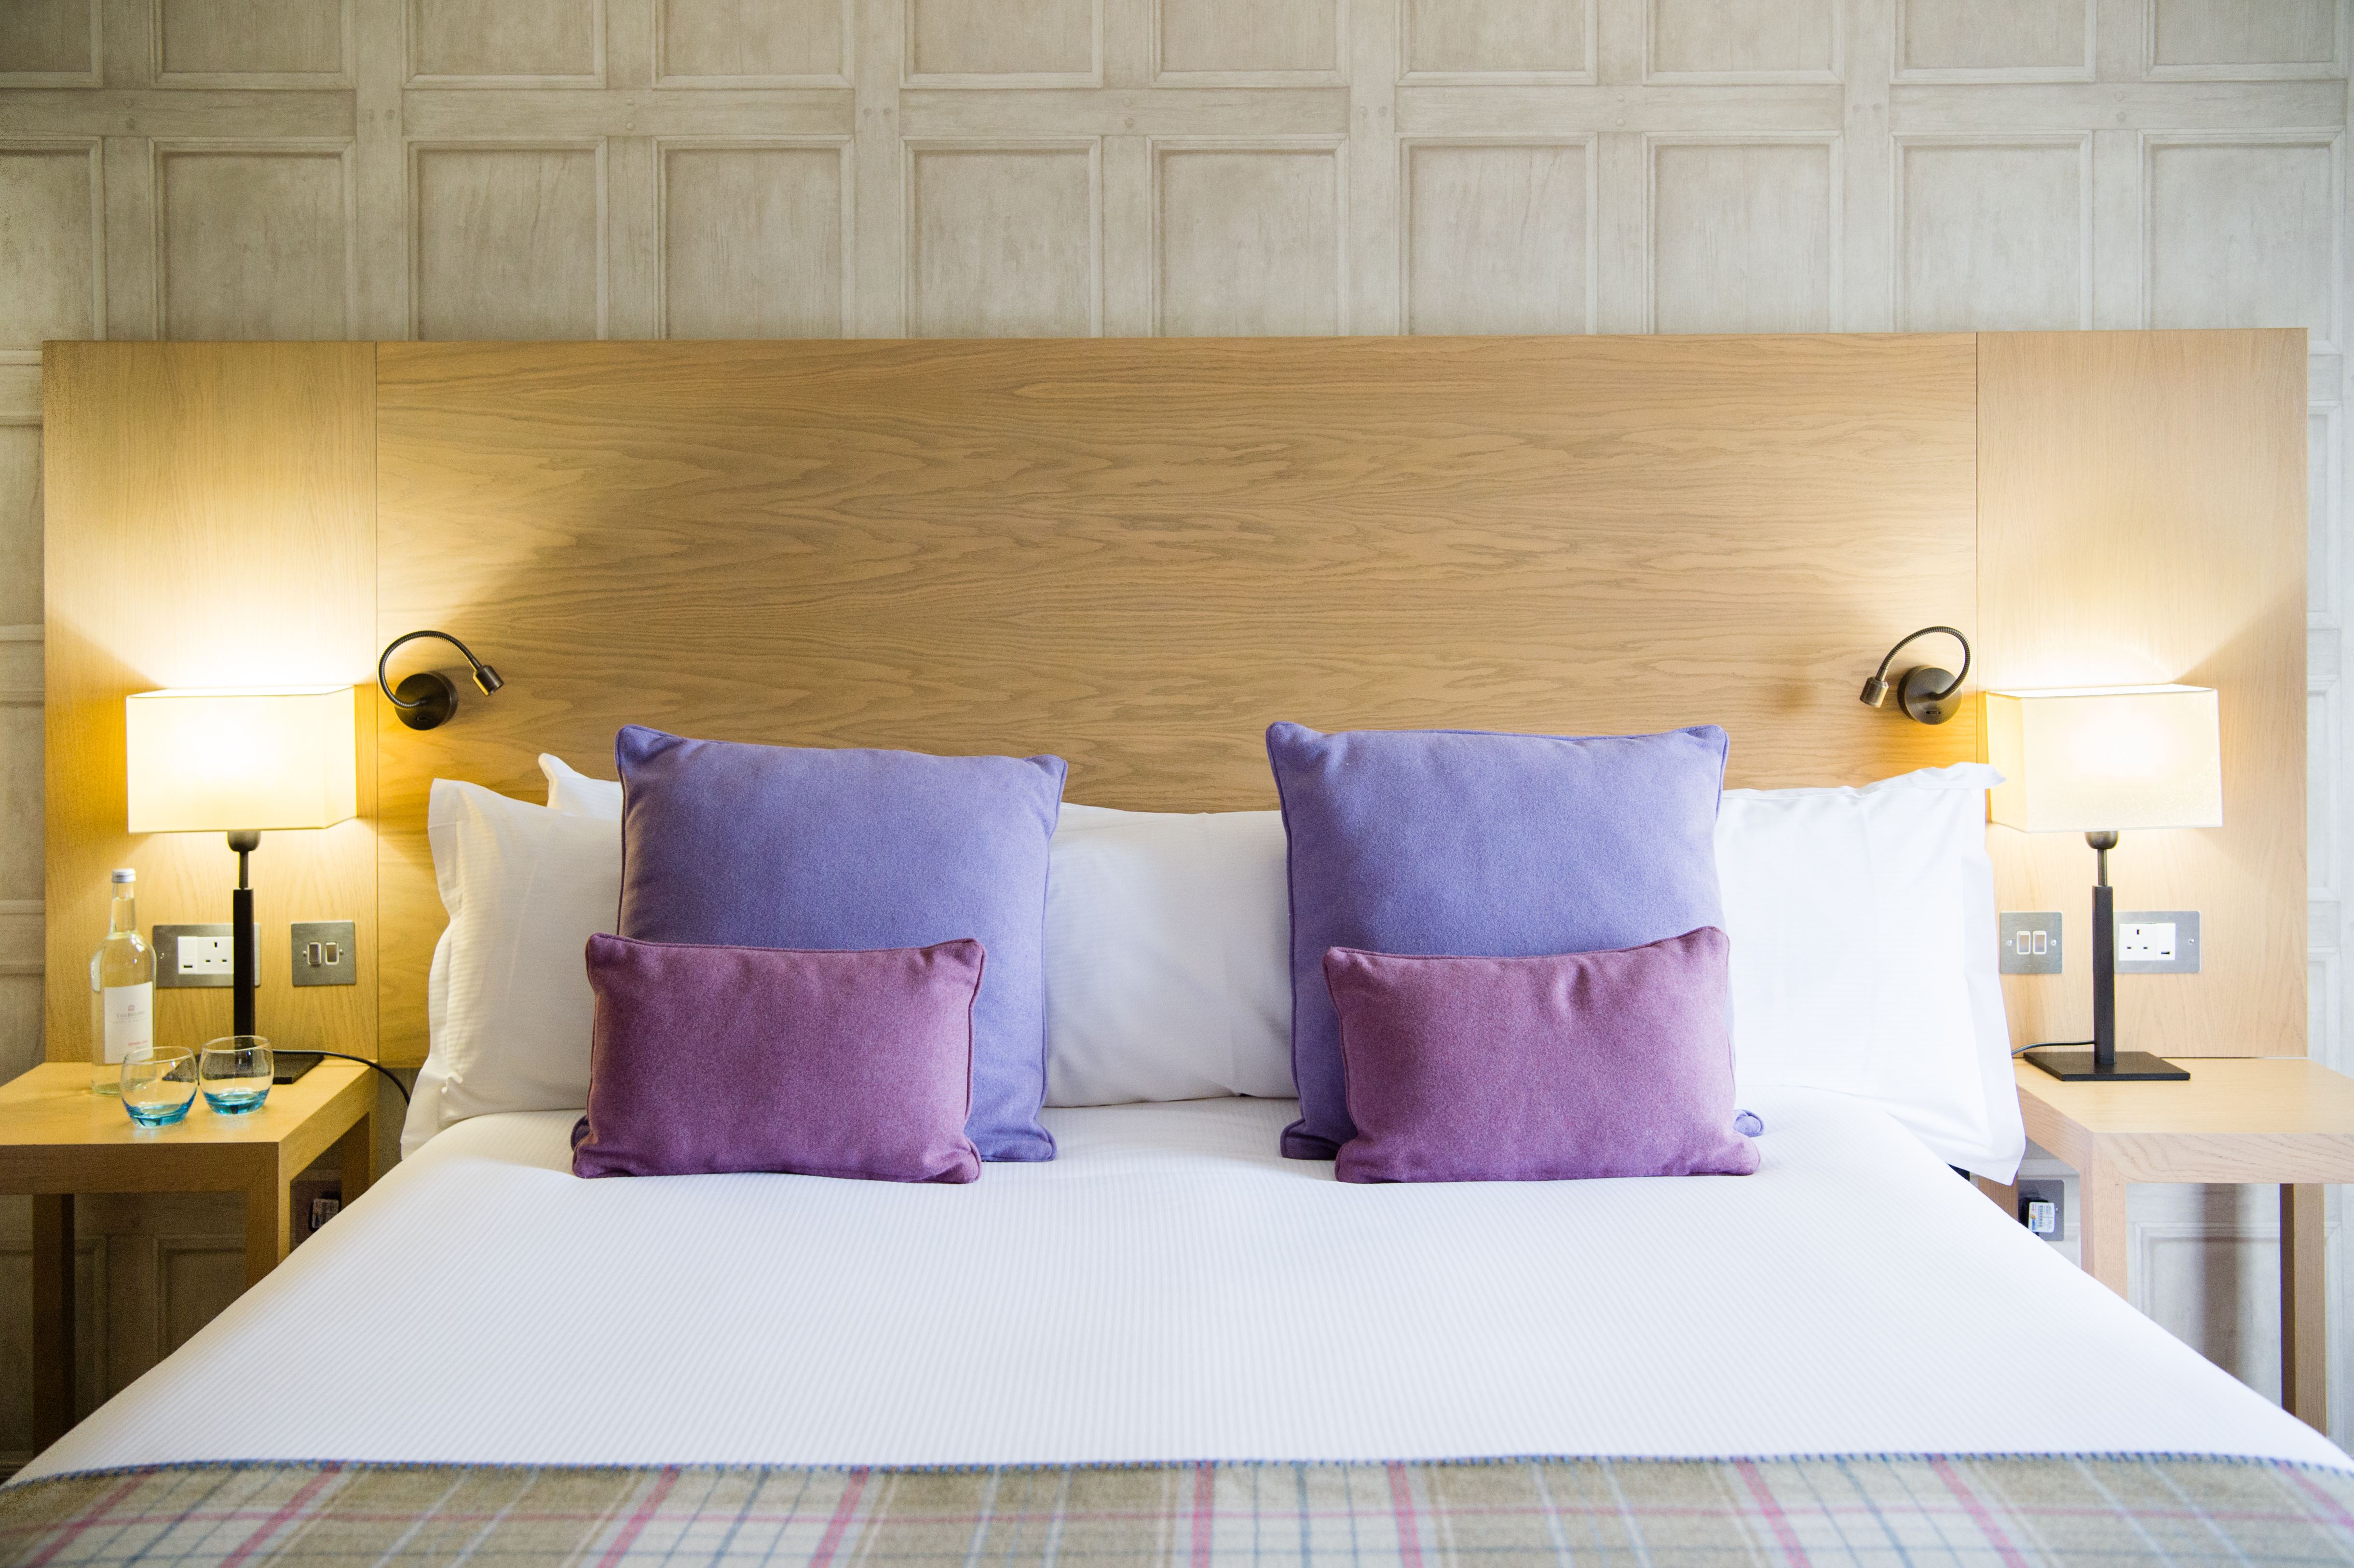 Superior Signature Double Bed with purple pillows and bedside lamps